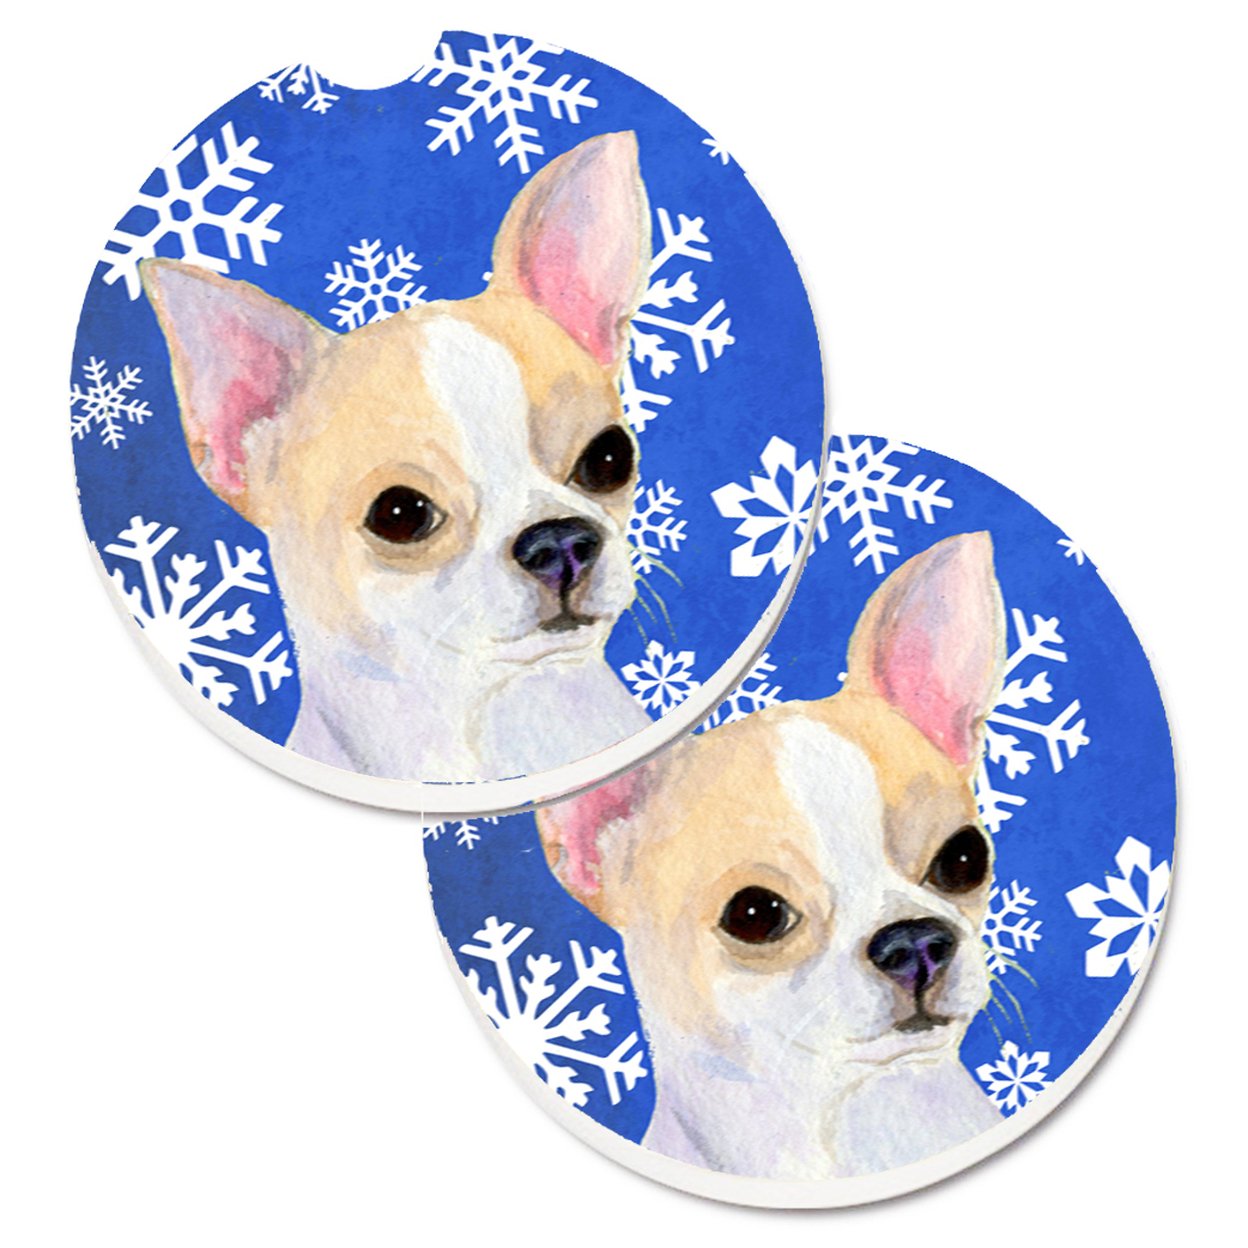 Multicolor 2.56 Carolines Treasures Chihuahua Winter Snowflakes Holiday Set of 2 Cup Holder Car Coasters SS4656CARC 